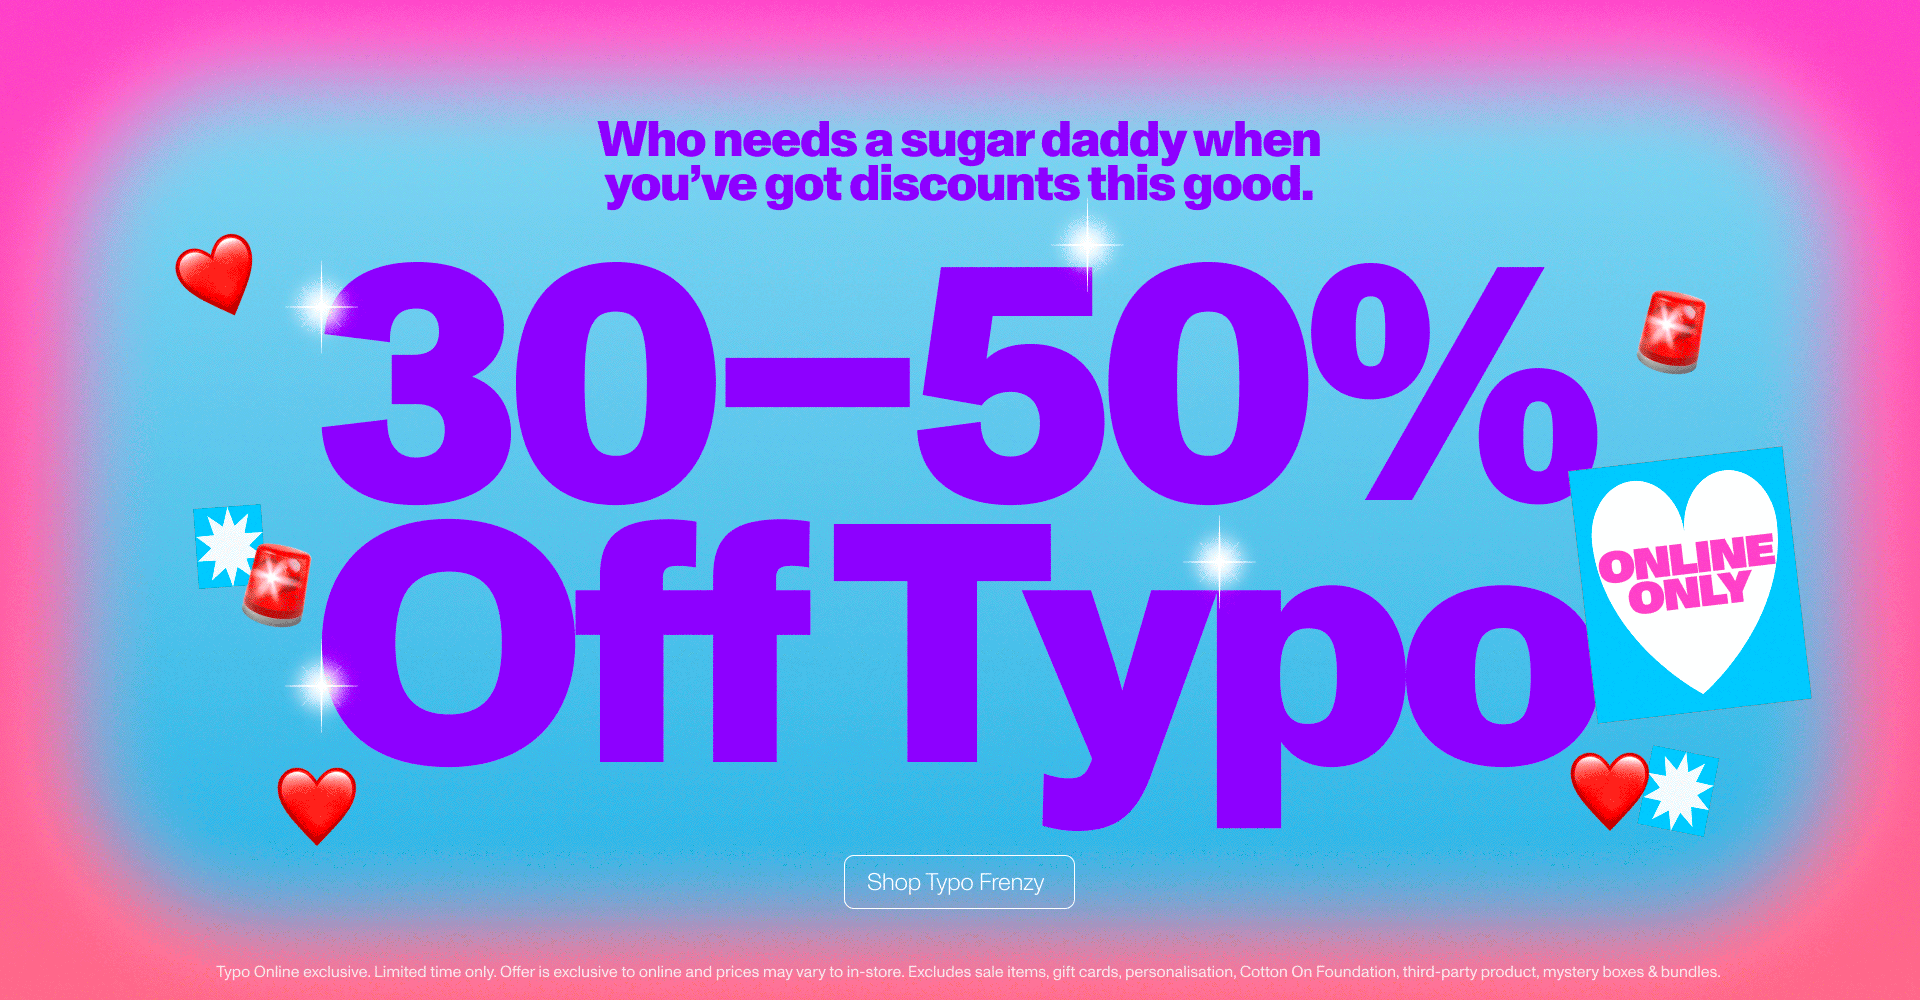 Who needs a sugar daddy when you've got discounts this good. 30-50% off typo. Online only. Shop typo frenzy.